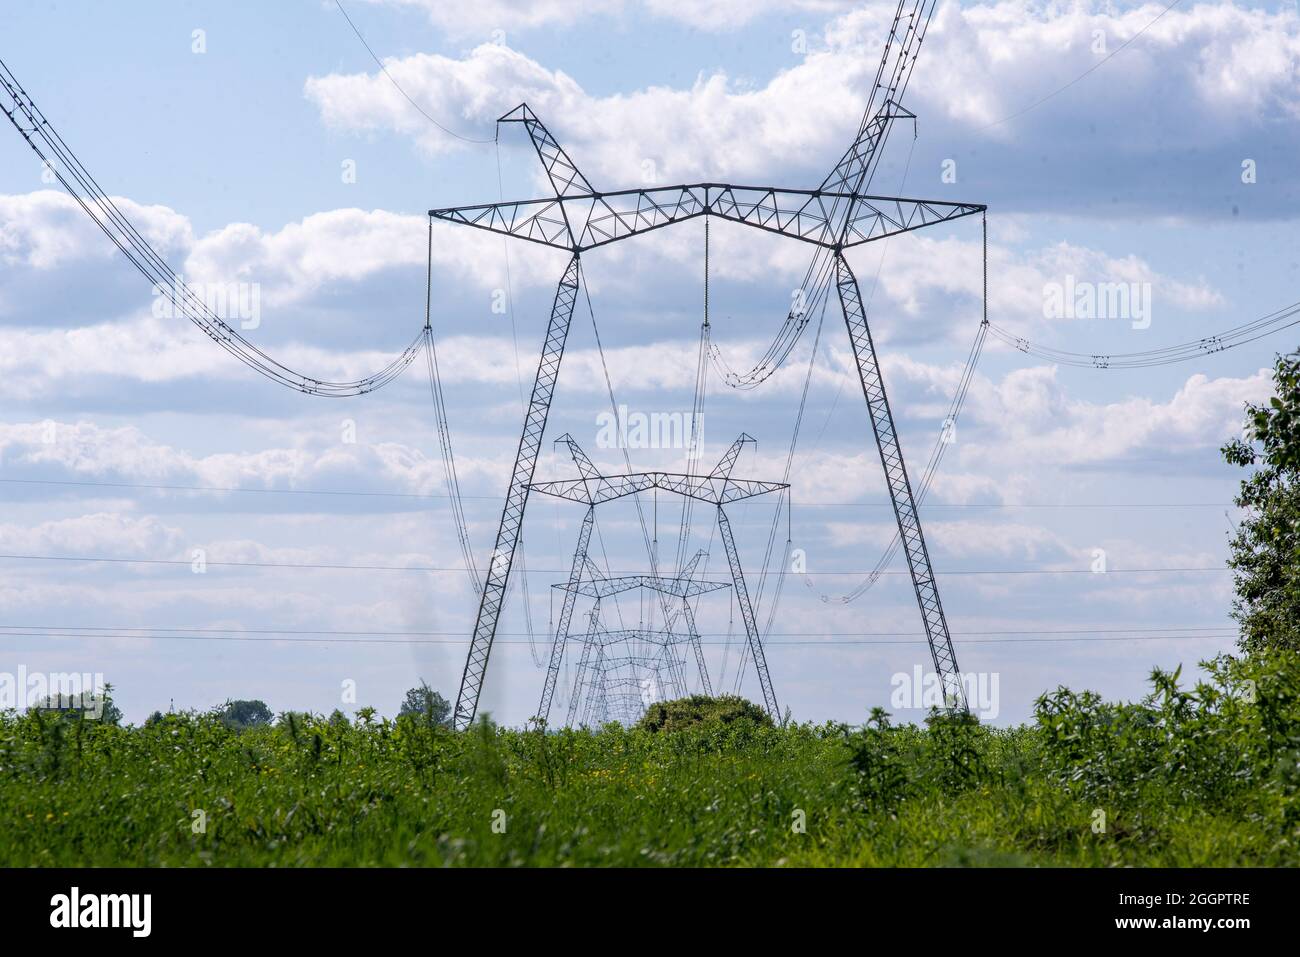 A view of power lines, electric power transmissions in a field in western Ukraine.Prime Minister of Ukraine, Denis Shmygal announced that from October 1st, the cost of electricity for 80% of the population will decrease following the Cabinet of Ministers passing a resolution which reduced the electricity tariff to UAH 1.44 per kilowatt/hour if households consume less than 250 kilowatt/hours per month. At the same time, if the household uses more than this norm, then all consumed electricity must be paid at full price - UAH 1.68 per kWh. Stock Photo